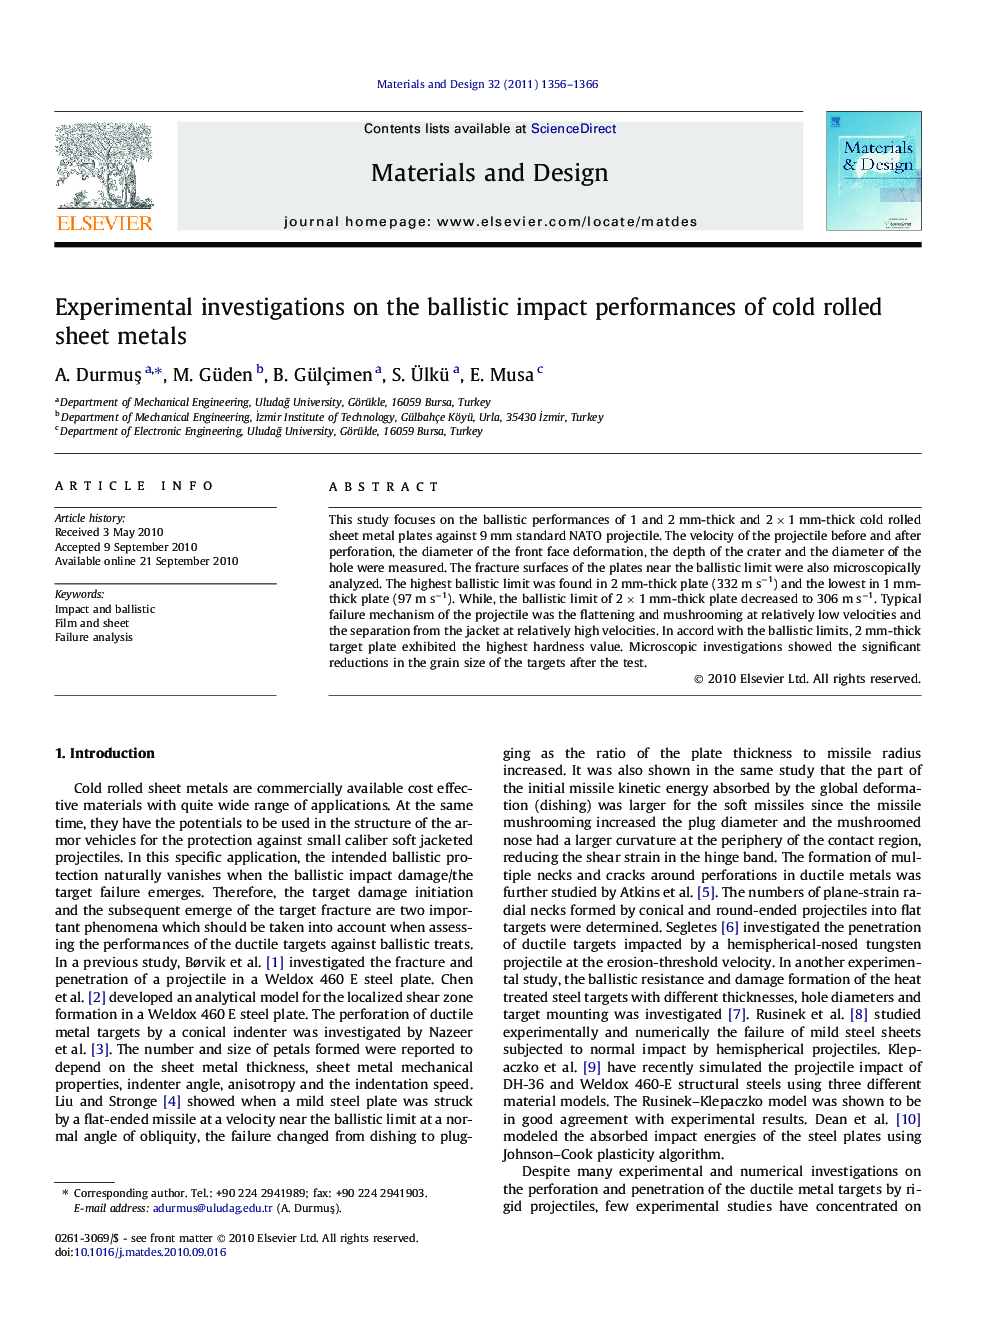 Experimental investigations on the ballistic impact performances of cold rolled sheet metals